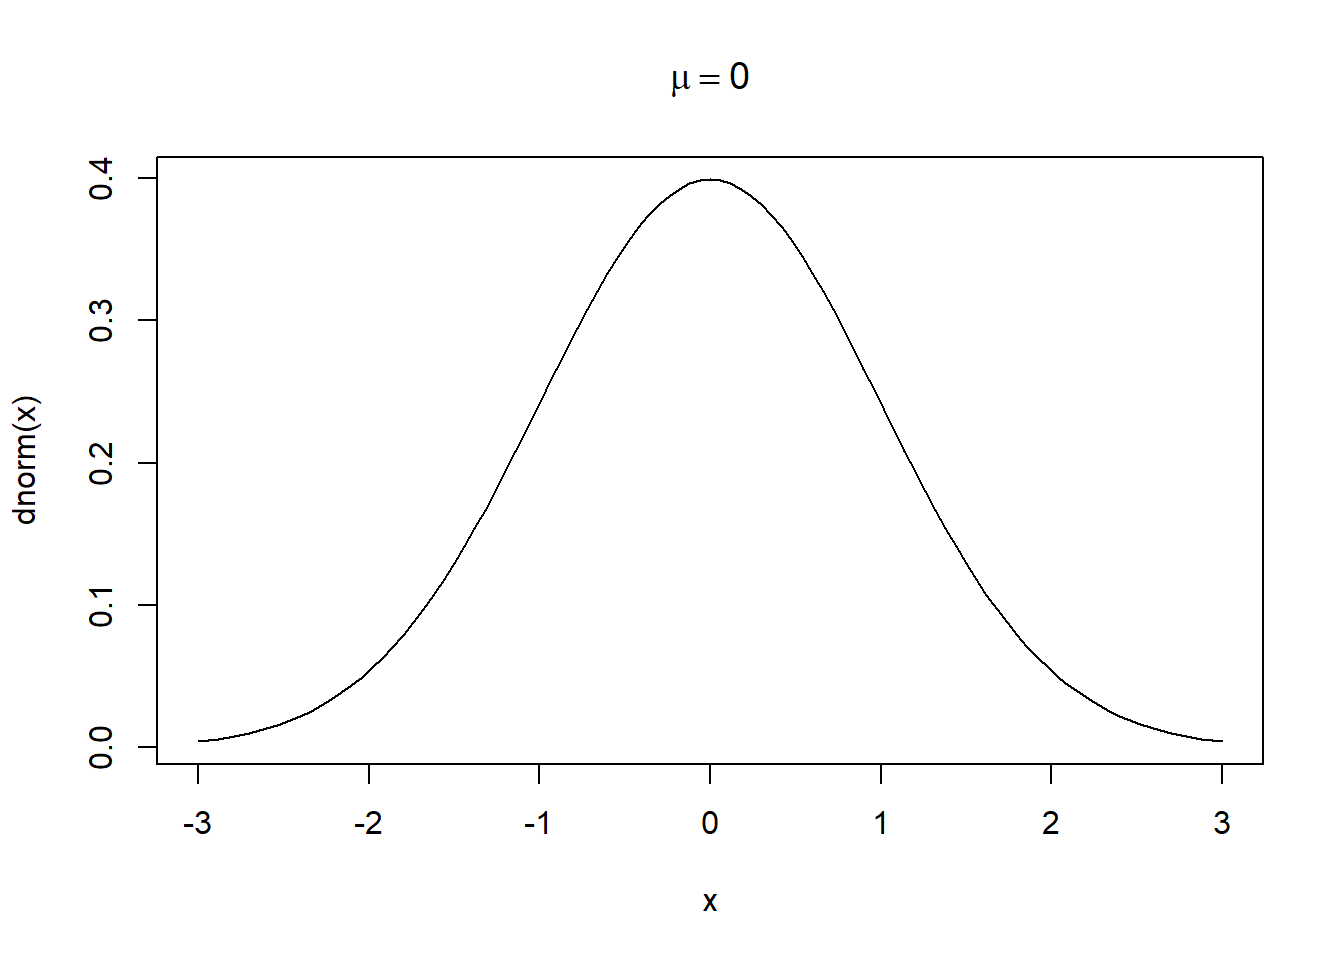 One normal distribution plot